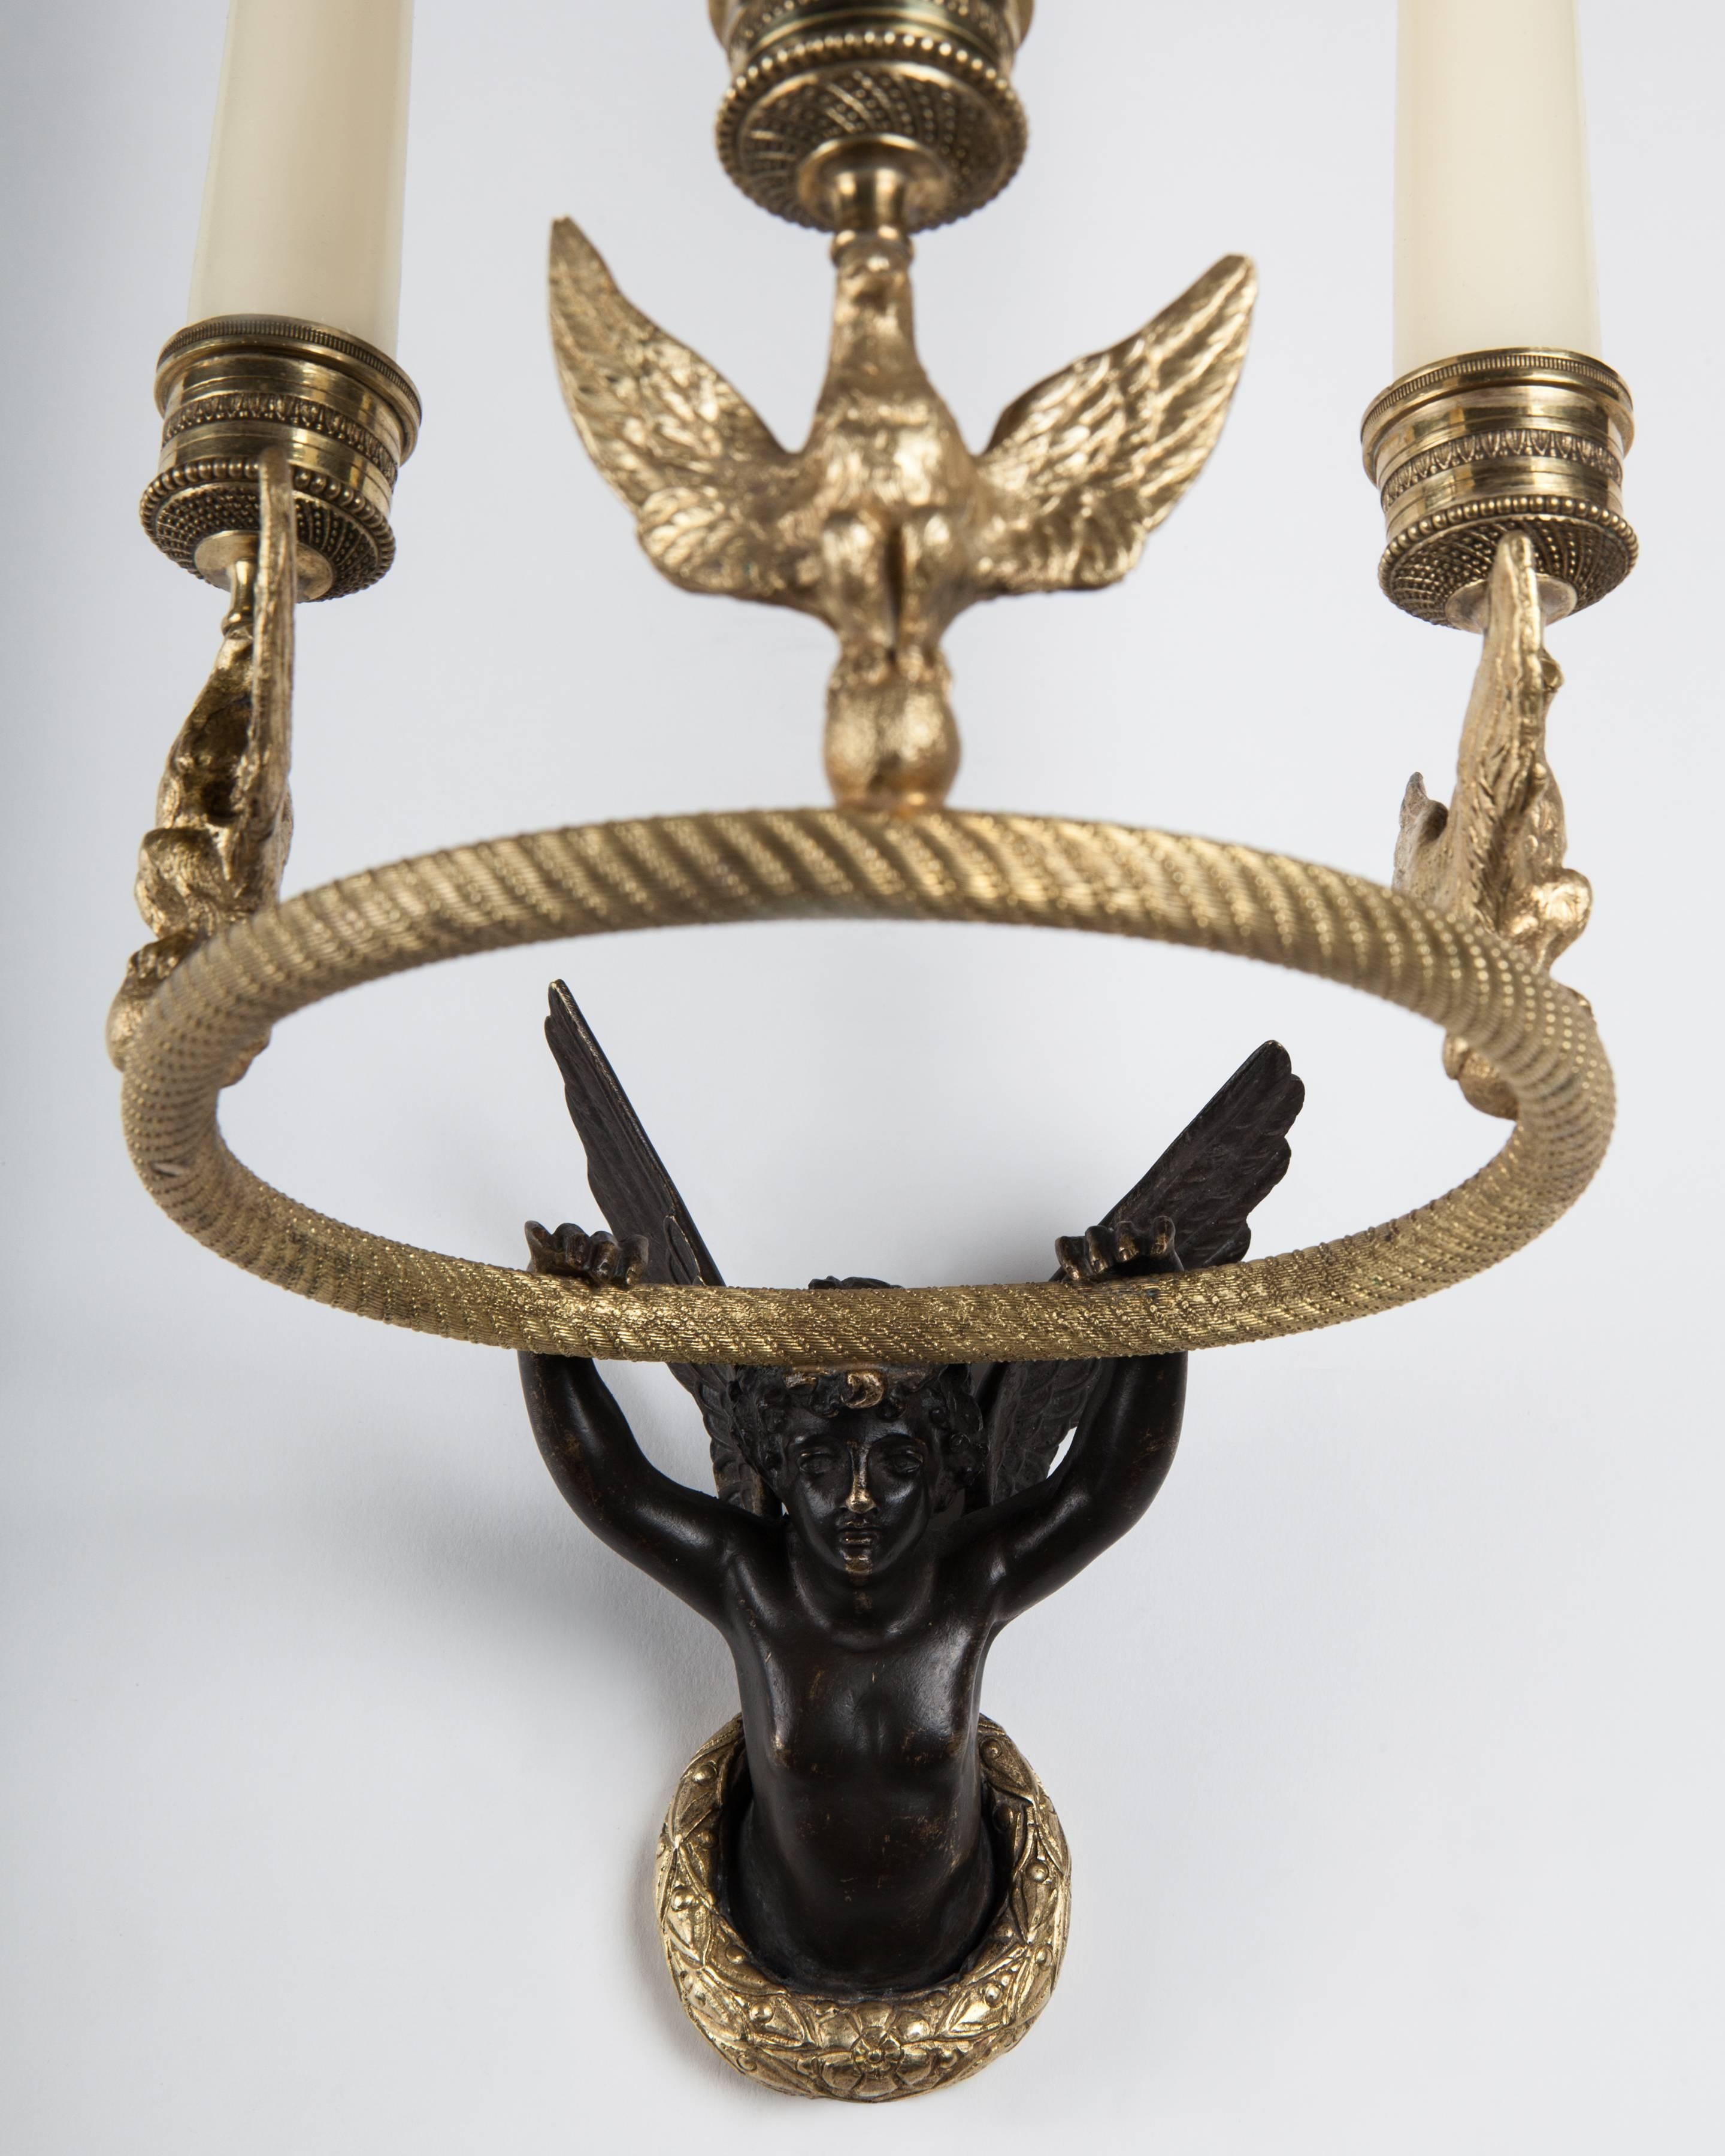 Gilt Gilded Empire Hoop Sconce for Candles with Winged Figure and Three Eagles, 1860s For Sale